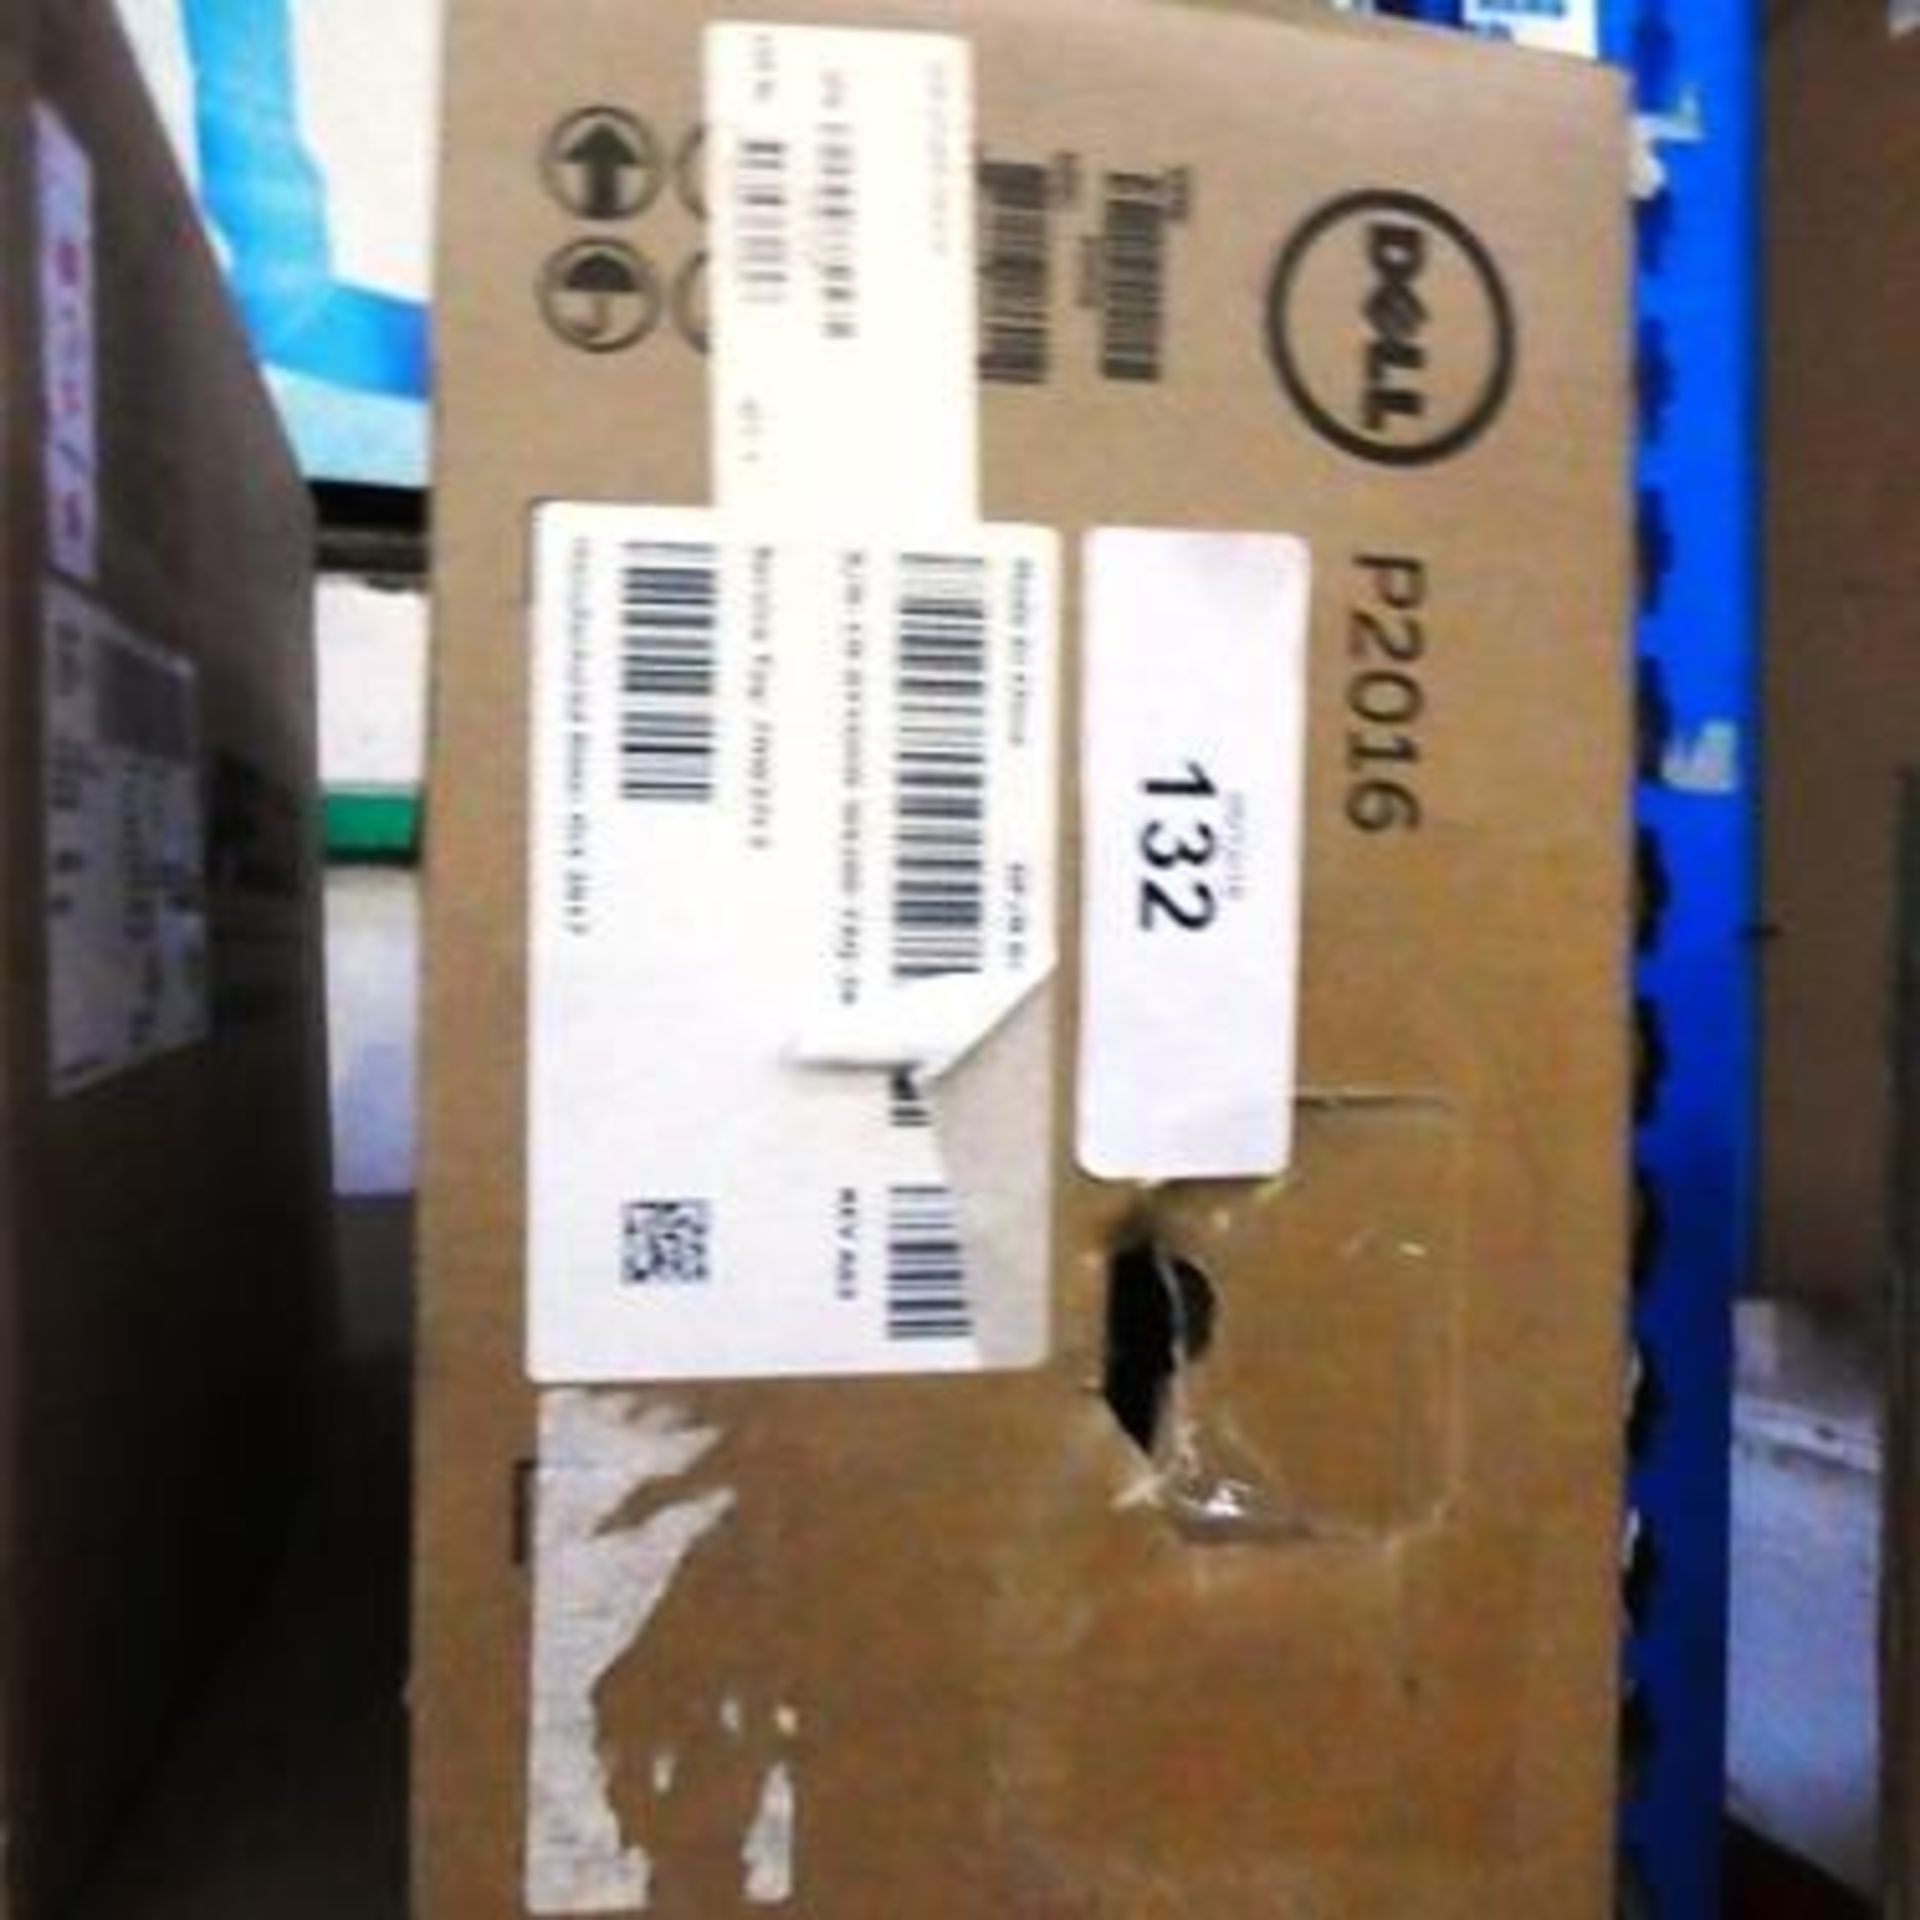 A Dell P2016 monitor, model 210-AFOR - Sealed new in box (esb7)